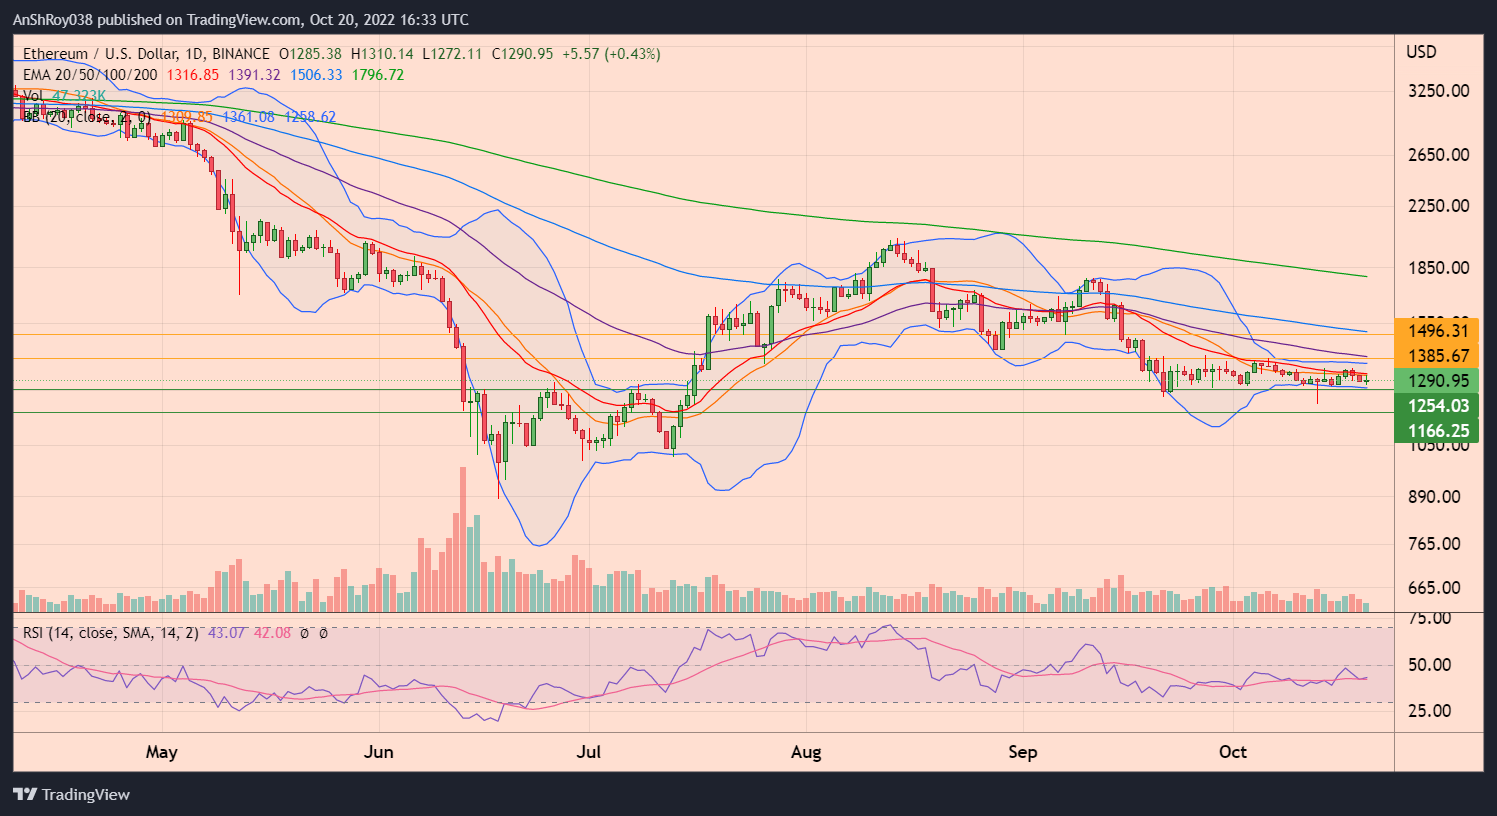 ETHUSD daily chart with RSI and Bollinger bands